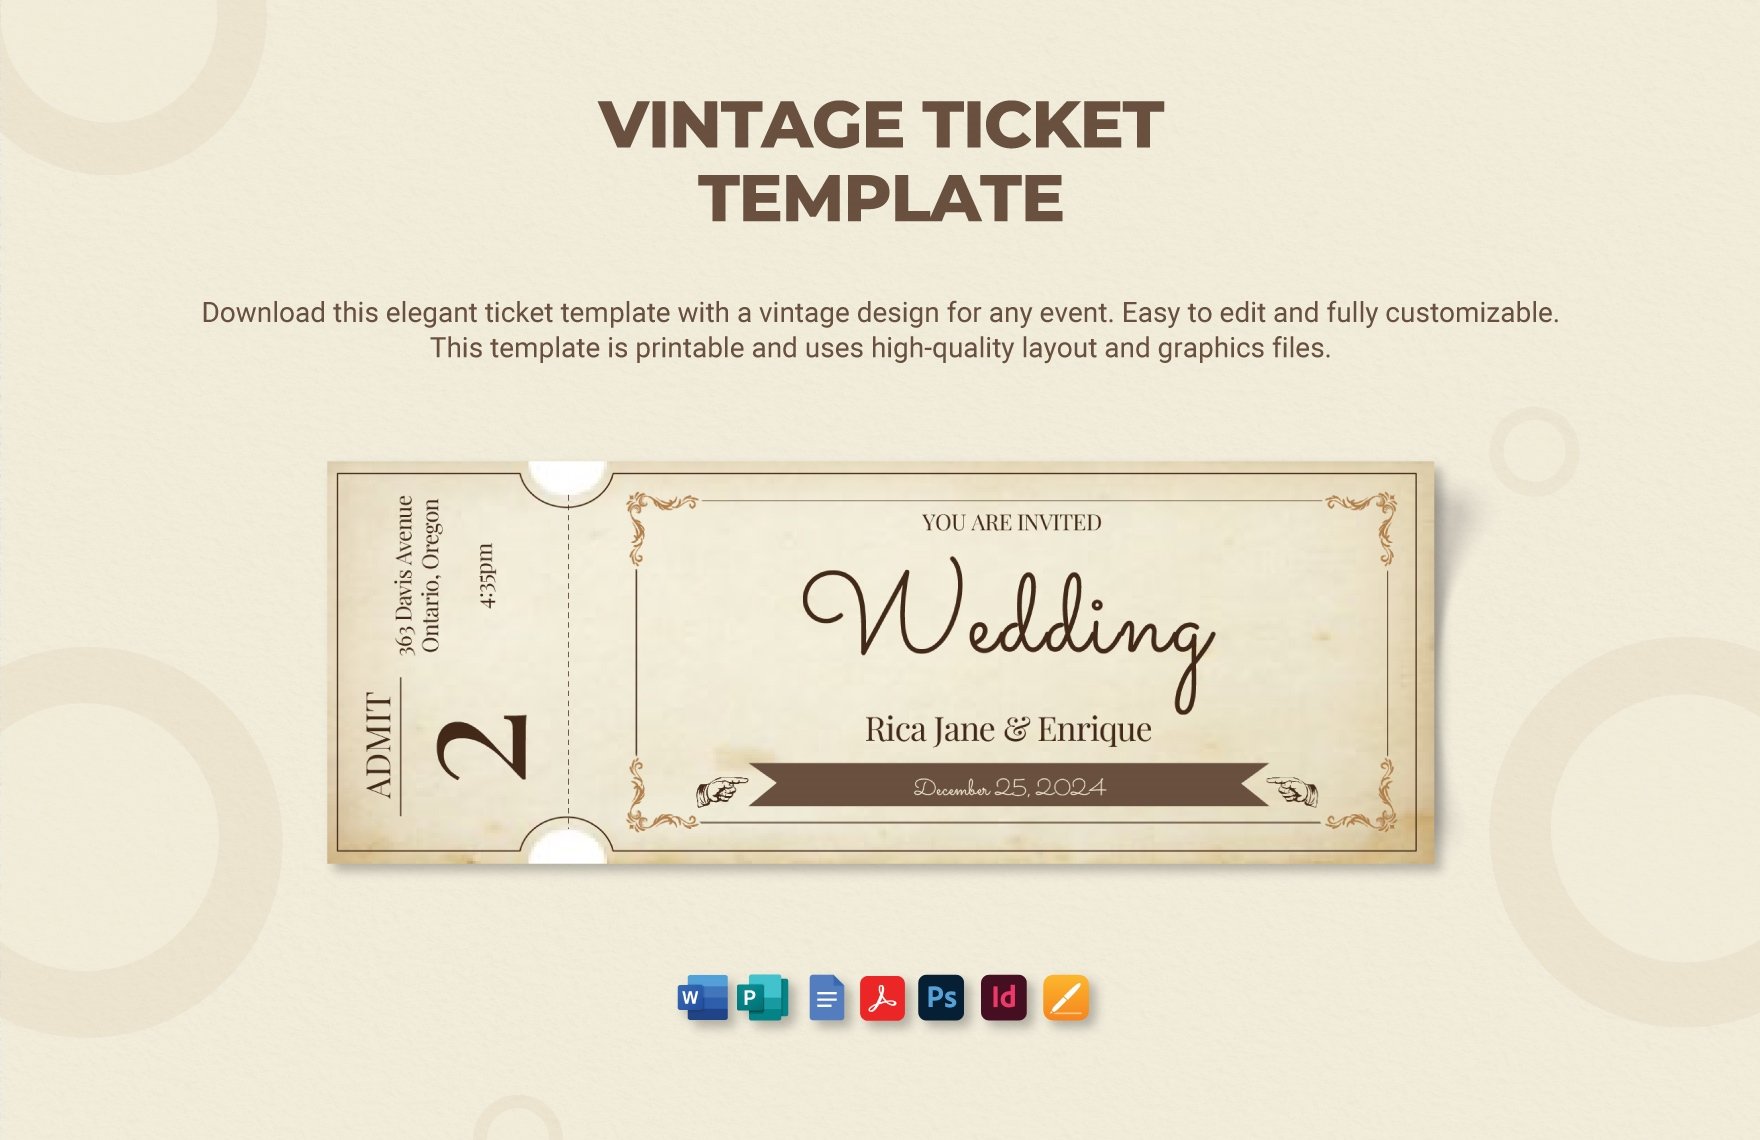 Vintage Ticket Template in Word, PDF, Illustrator, PSD, Apple Pages, Publisher, InDesign